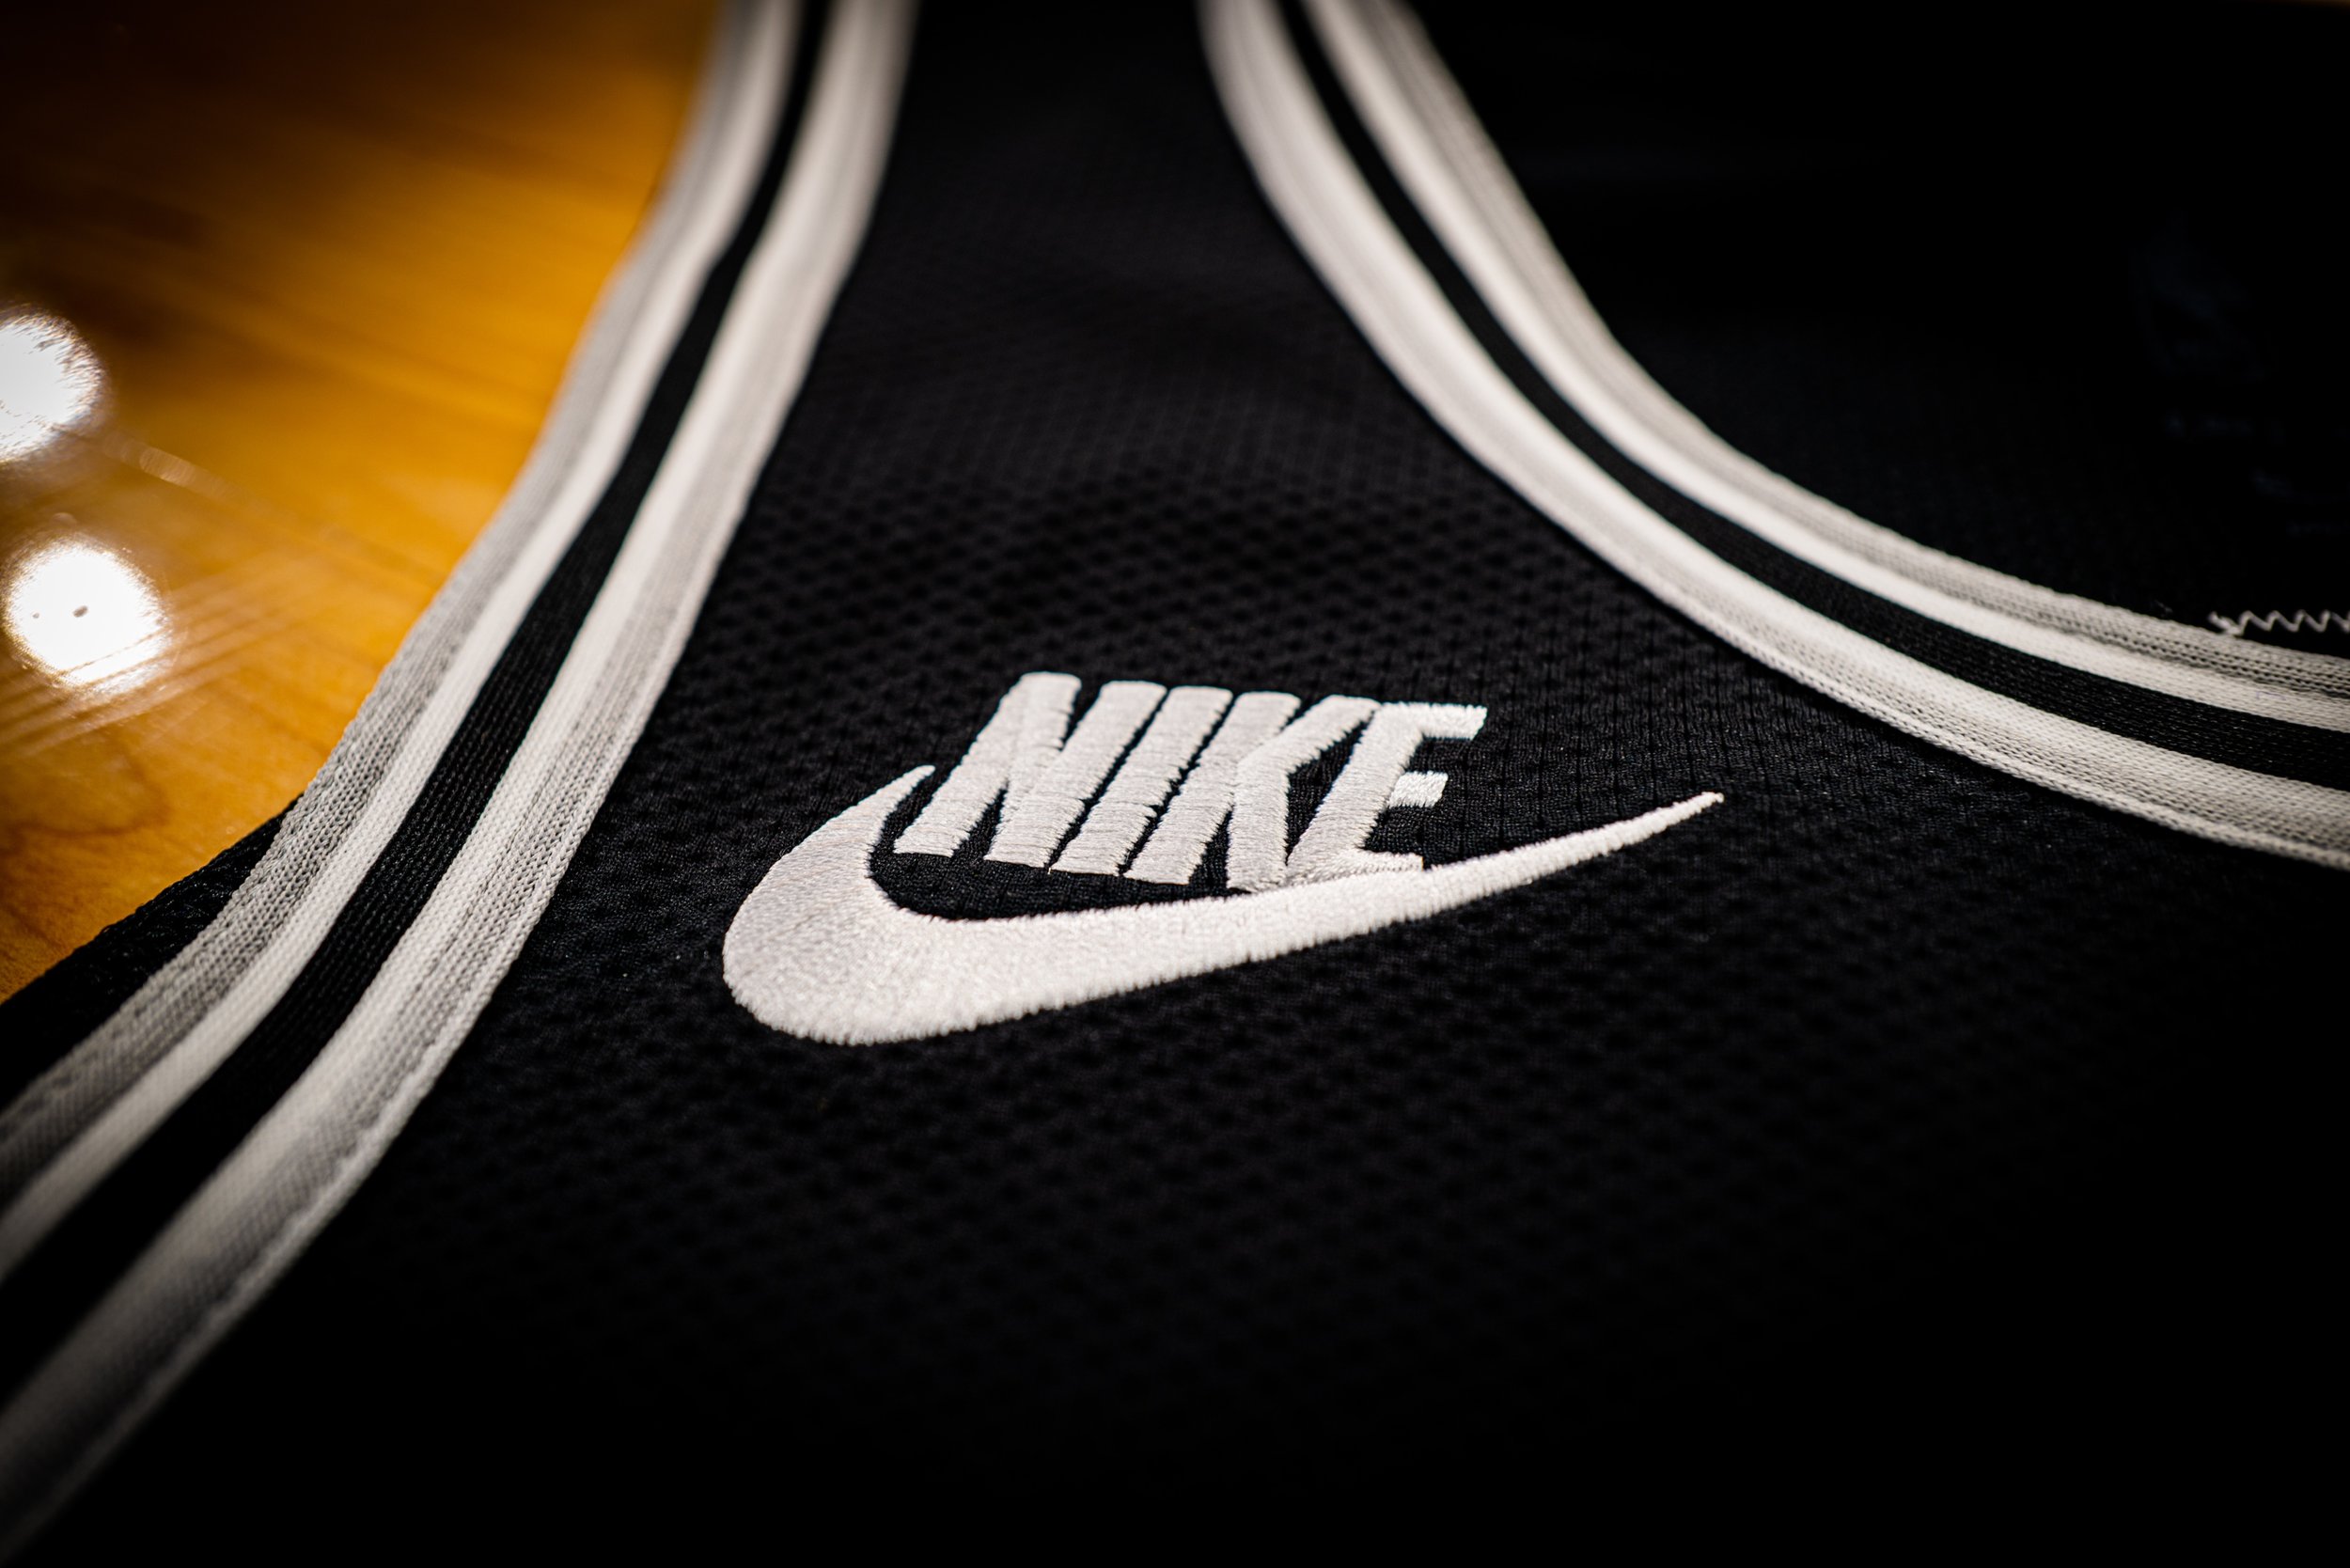 SPURS UNVEIL CLASSIC EDITION UNIFORMS FOR THEIR 50TH ANNIVERSARY SEASON